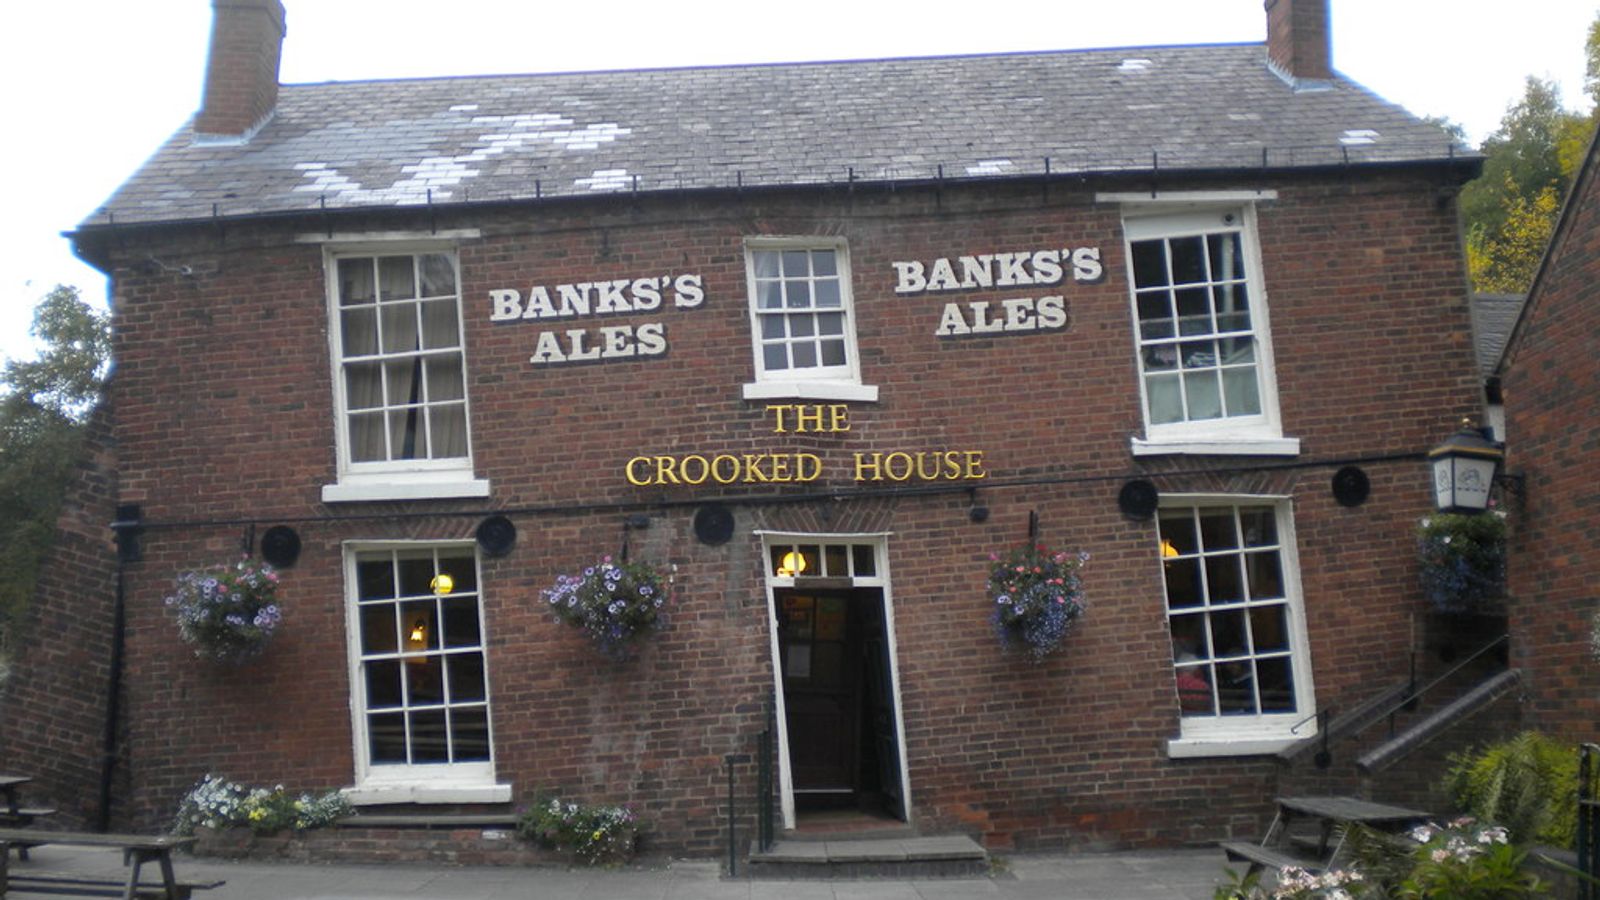 Crooked House: Two arrested on suspicion of arson with intent to endanger life after fire at Britain's 'wonkiest' pub